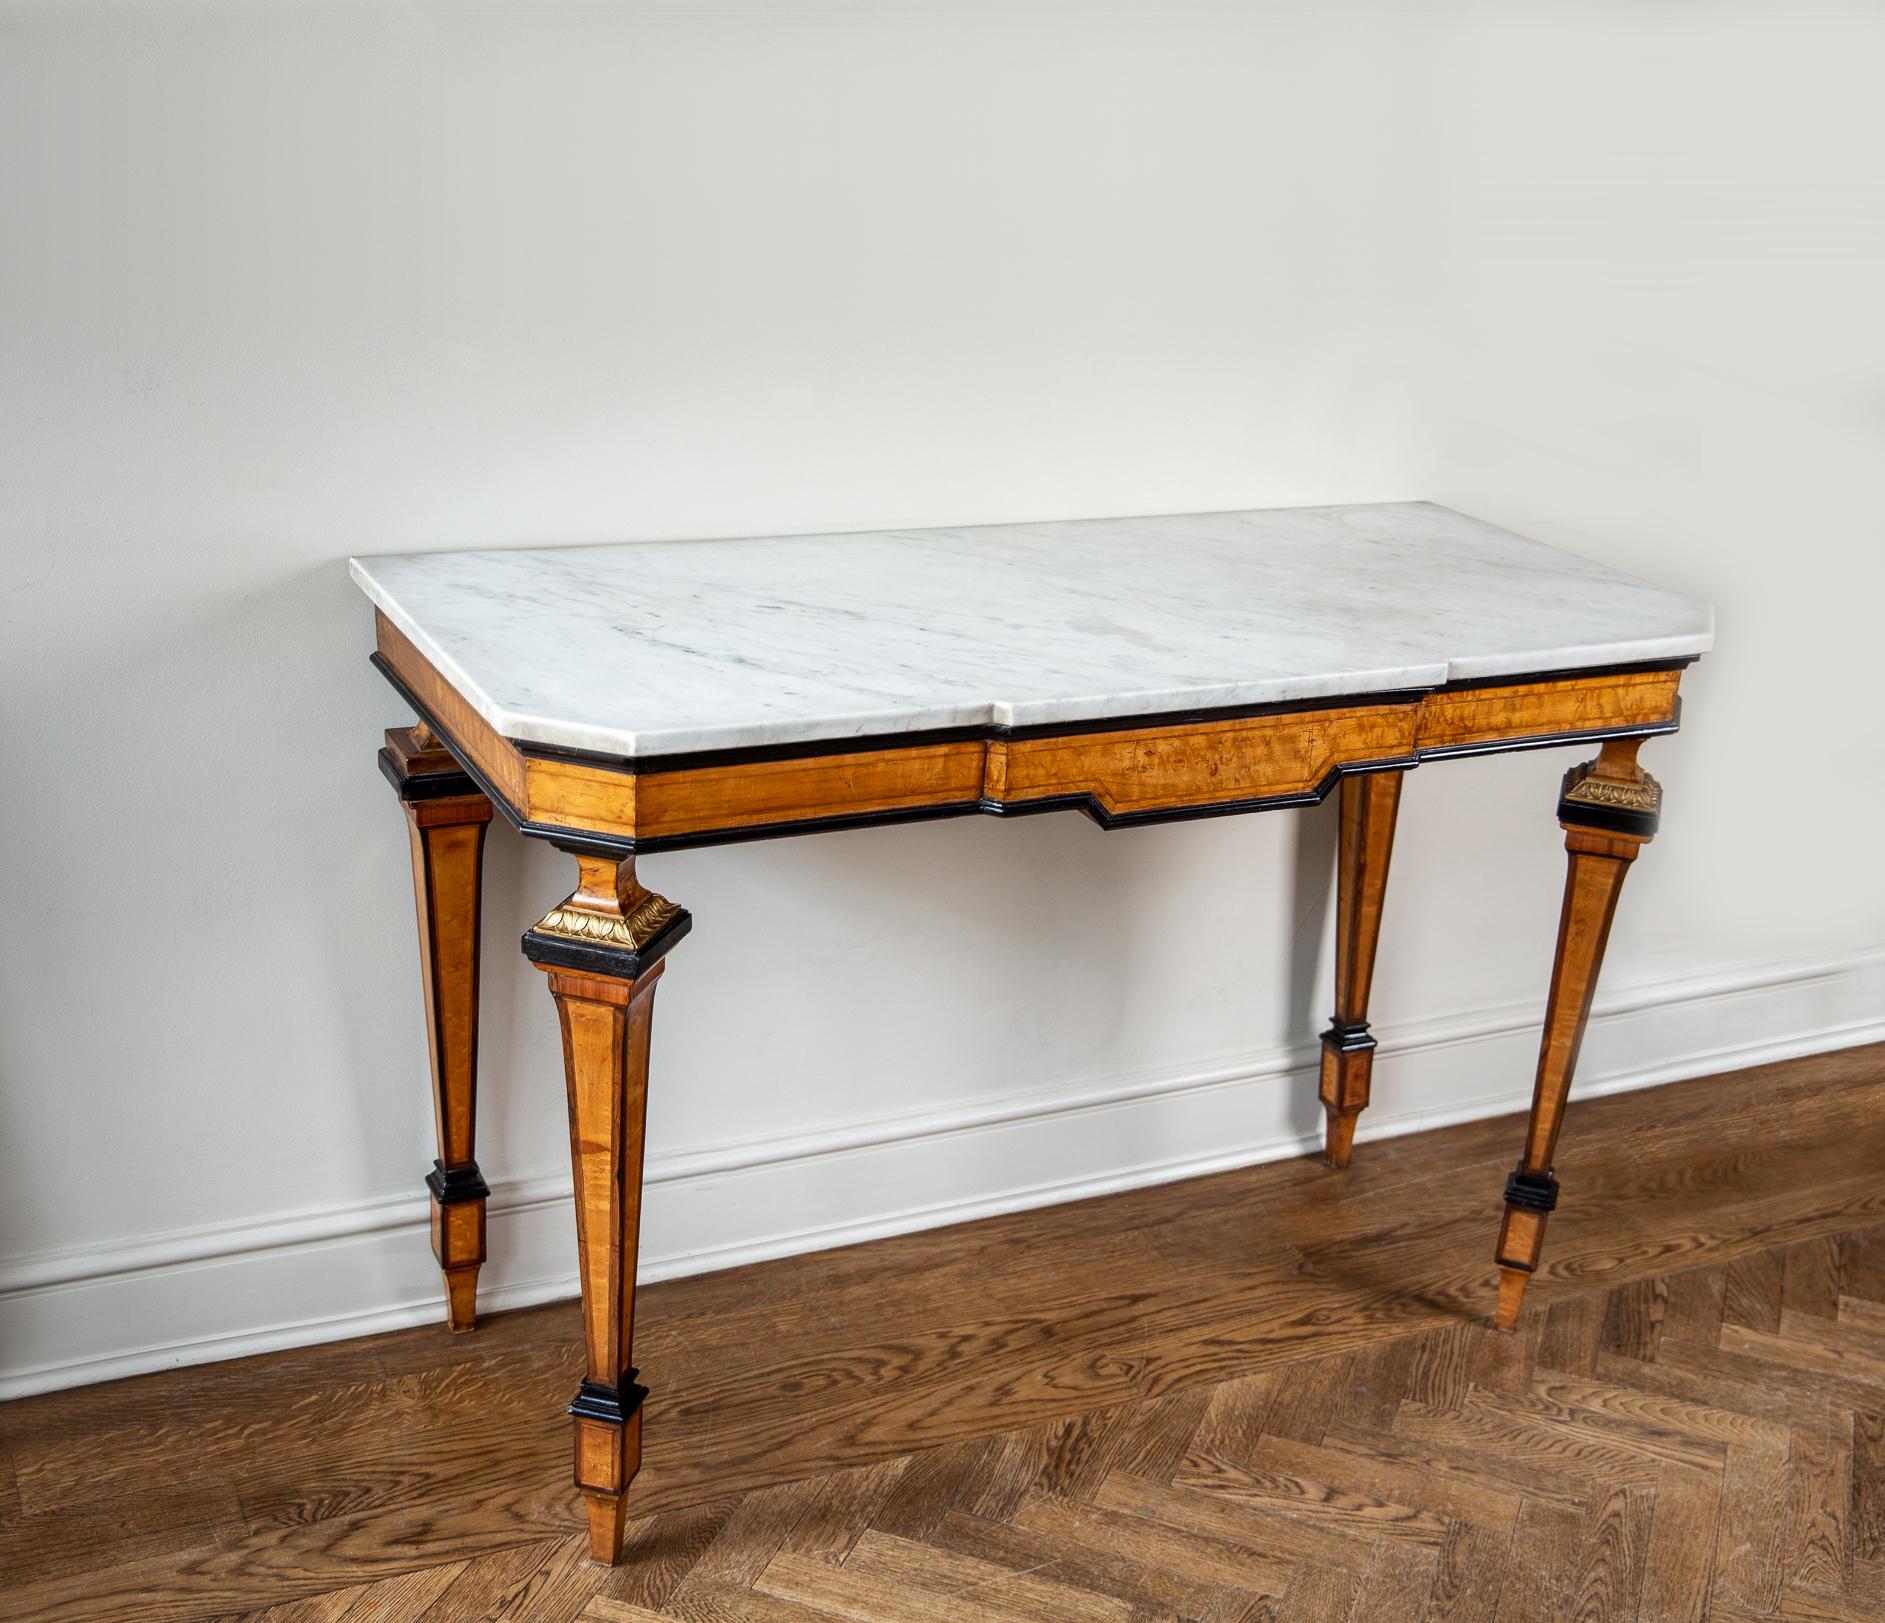 Carrara marble topped console table. A mid-19th century console table constructed of maple veneer on hard wood with graphic ebonised edging and contemporary angular design.

 